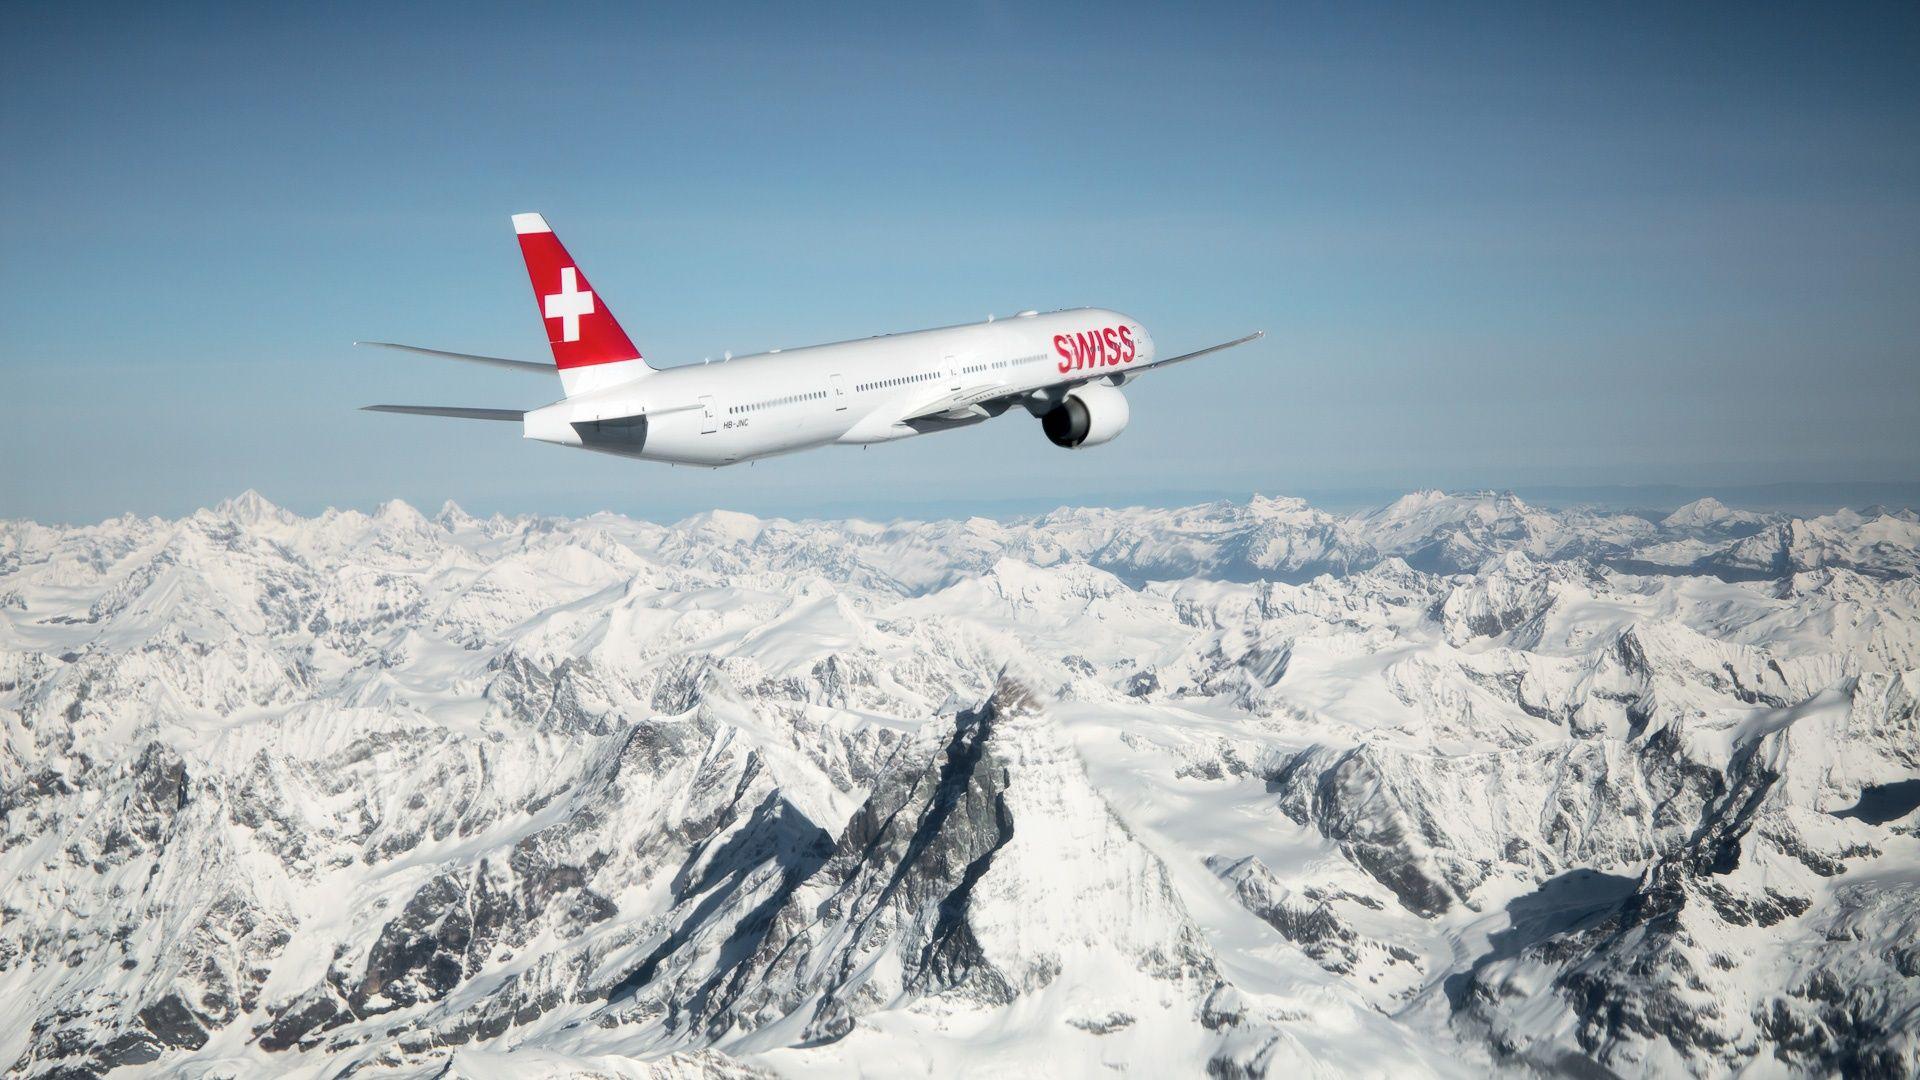 SWISS Boeing 777 over the Alps. World of SWISS